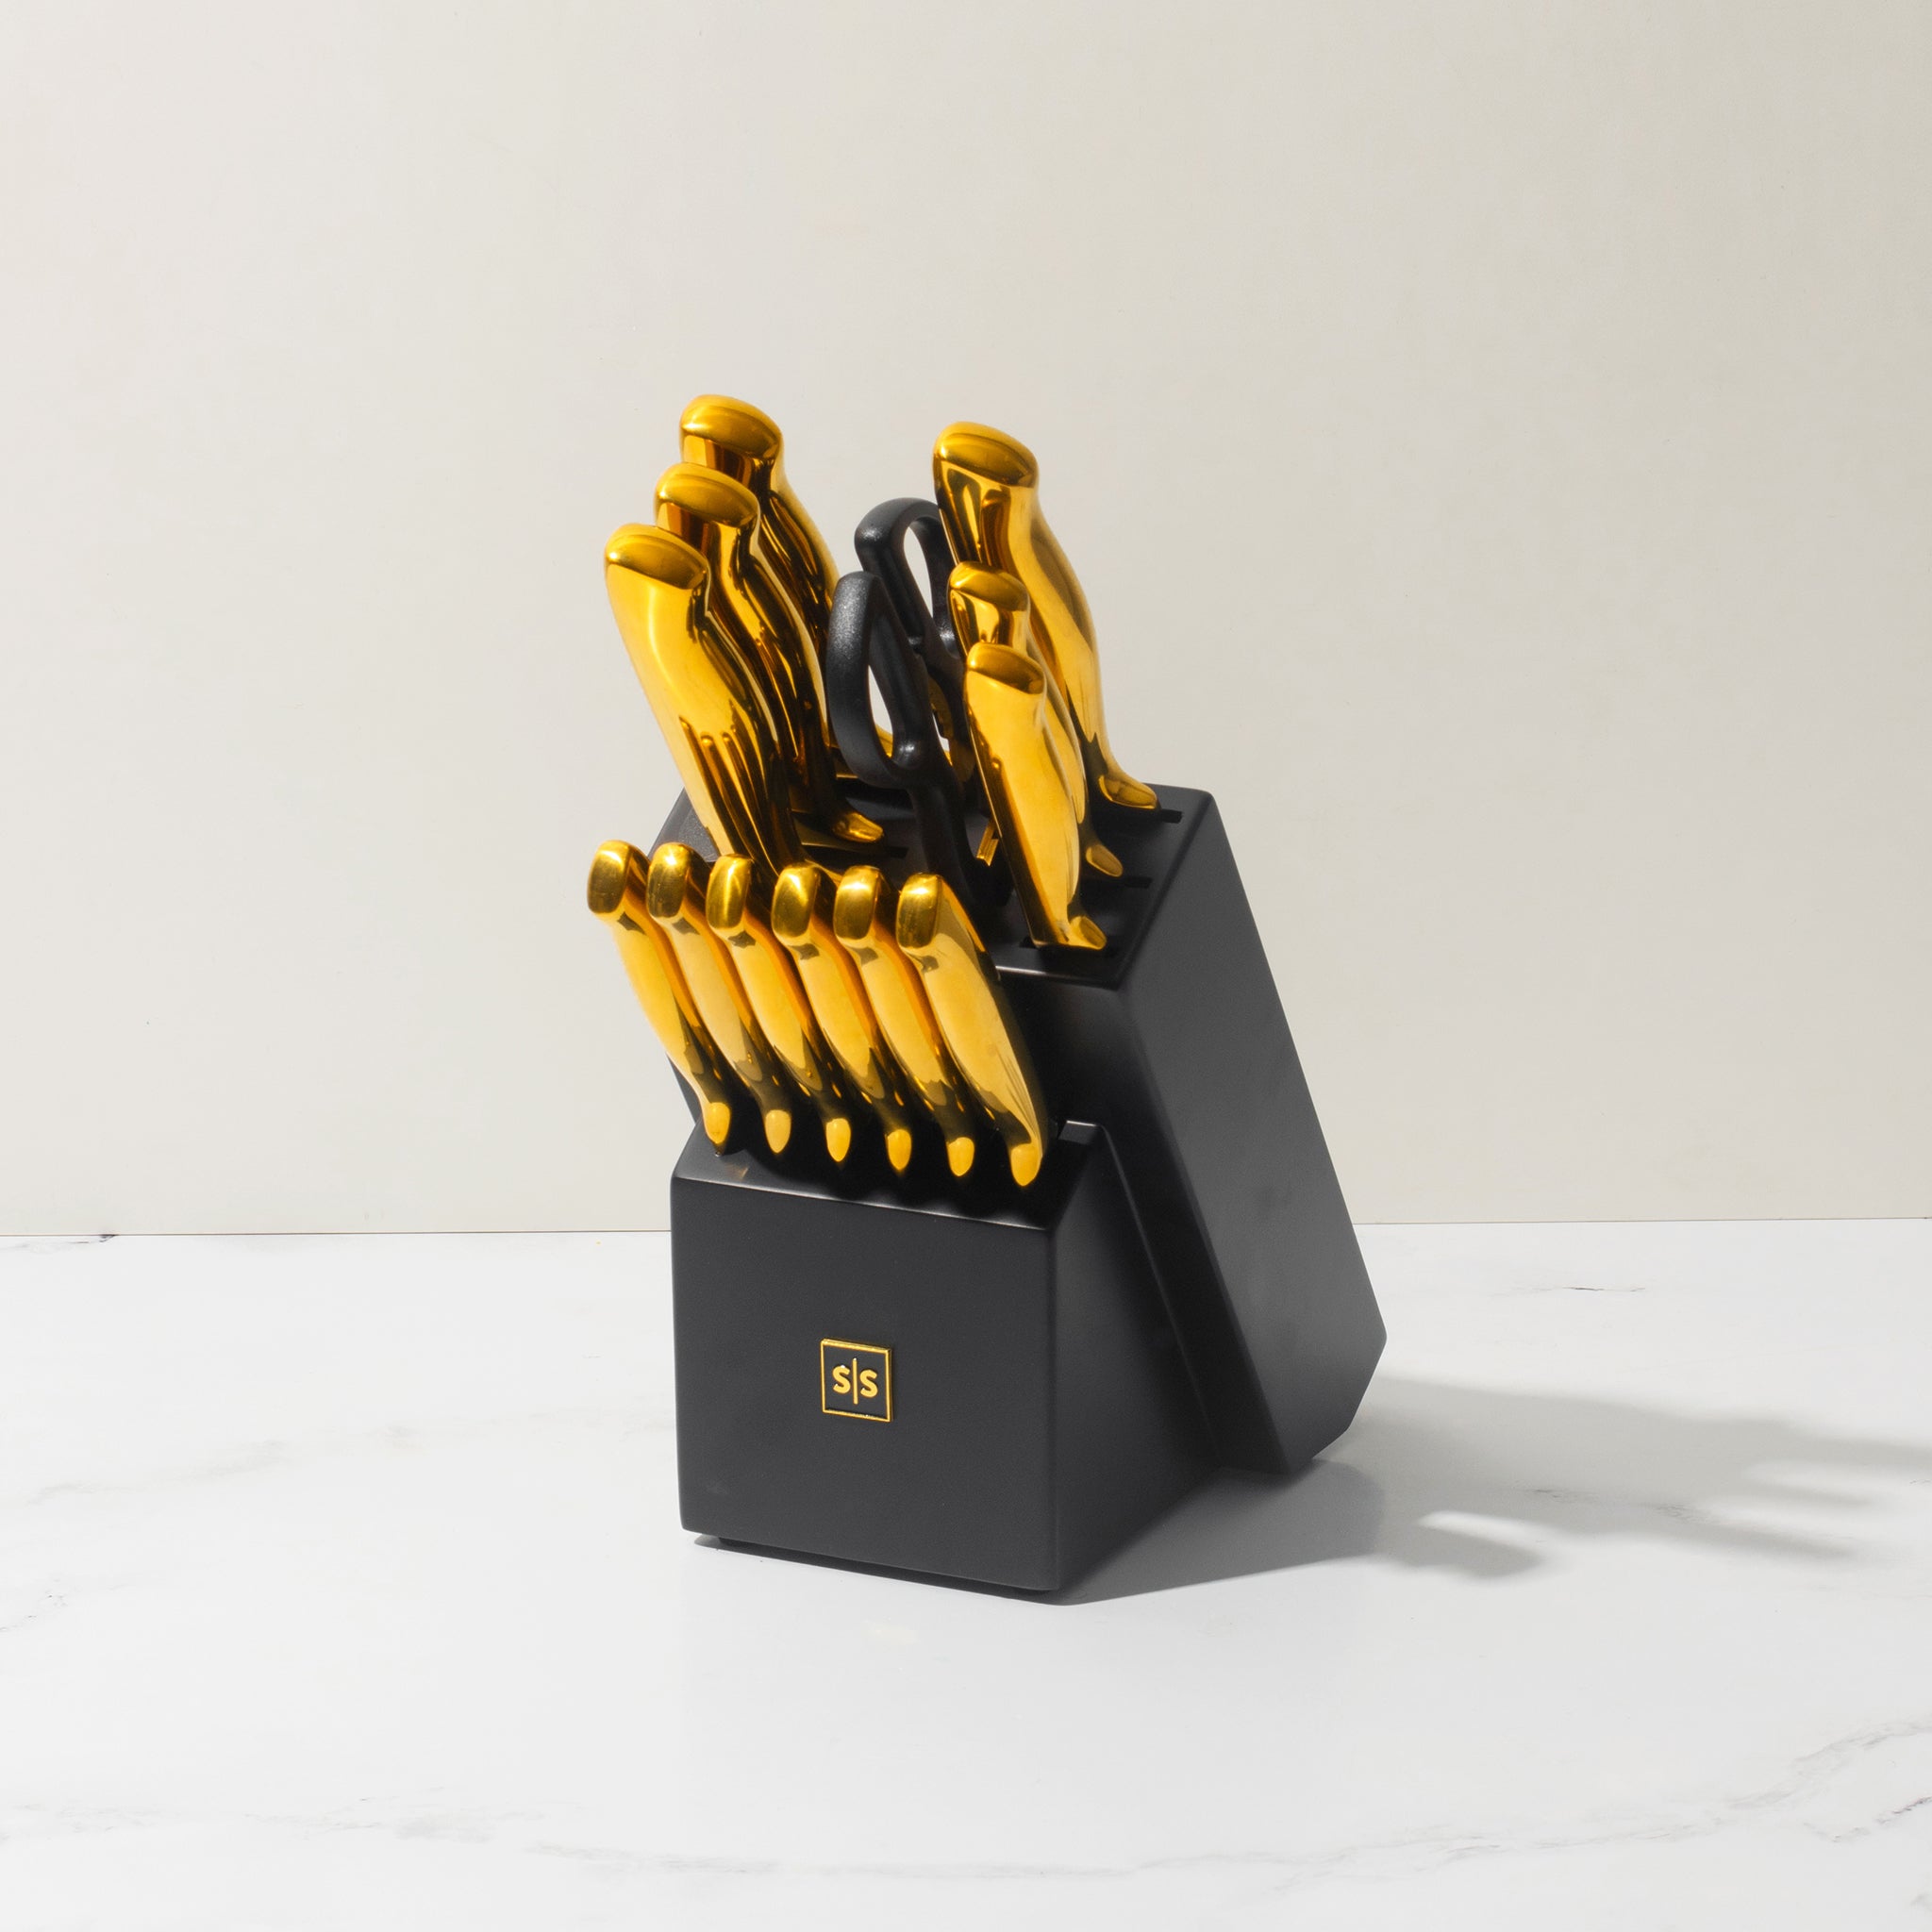 Black and Gold Knife Set with Sharpener- 14 PC Gold Knife Set with